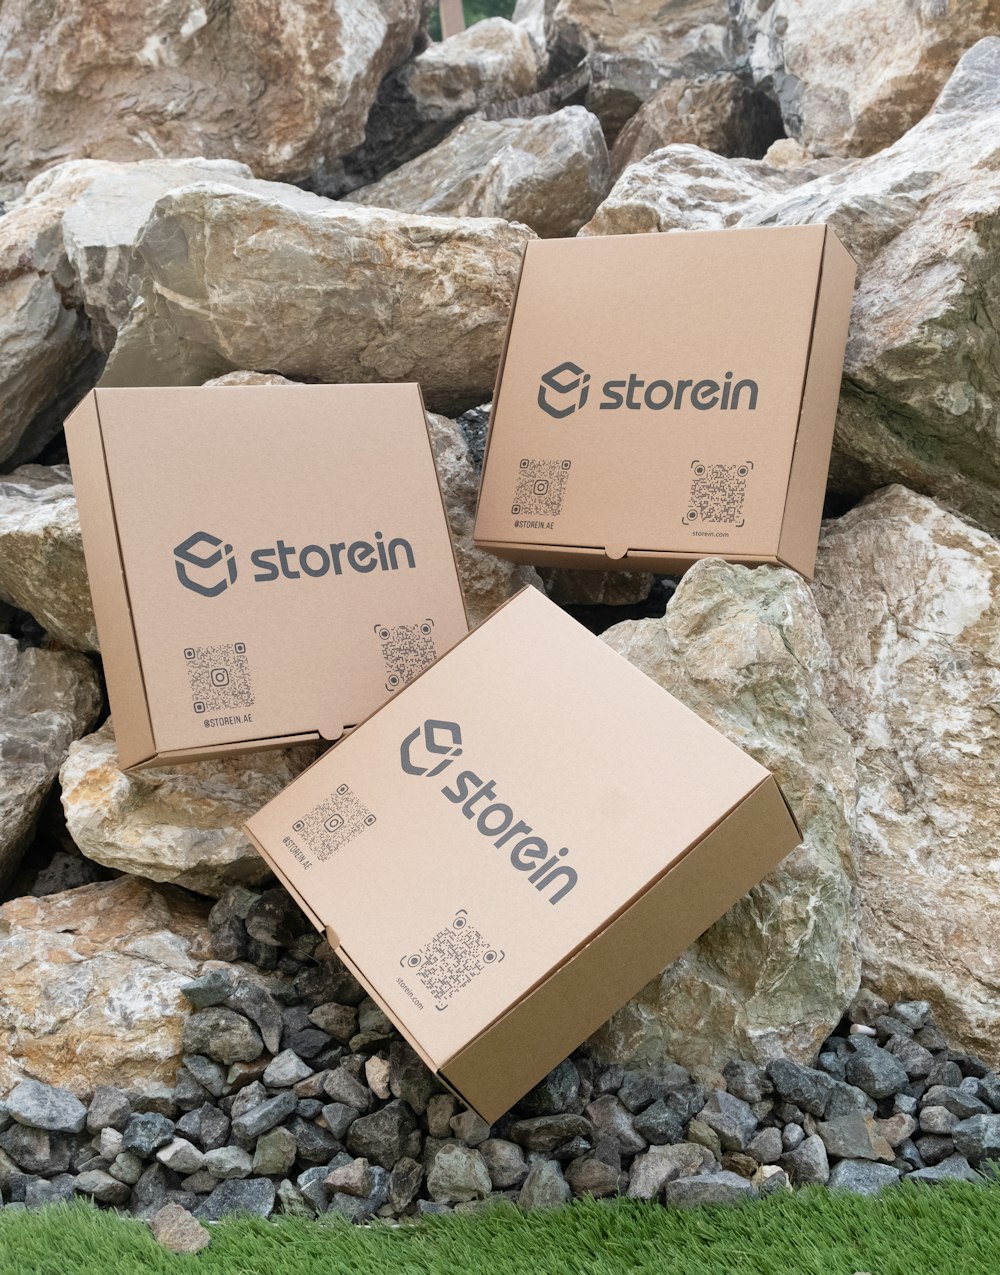 three boxes sitting on top of a pile of rocks